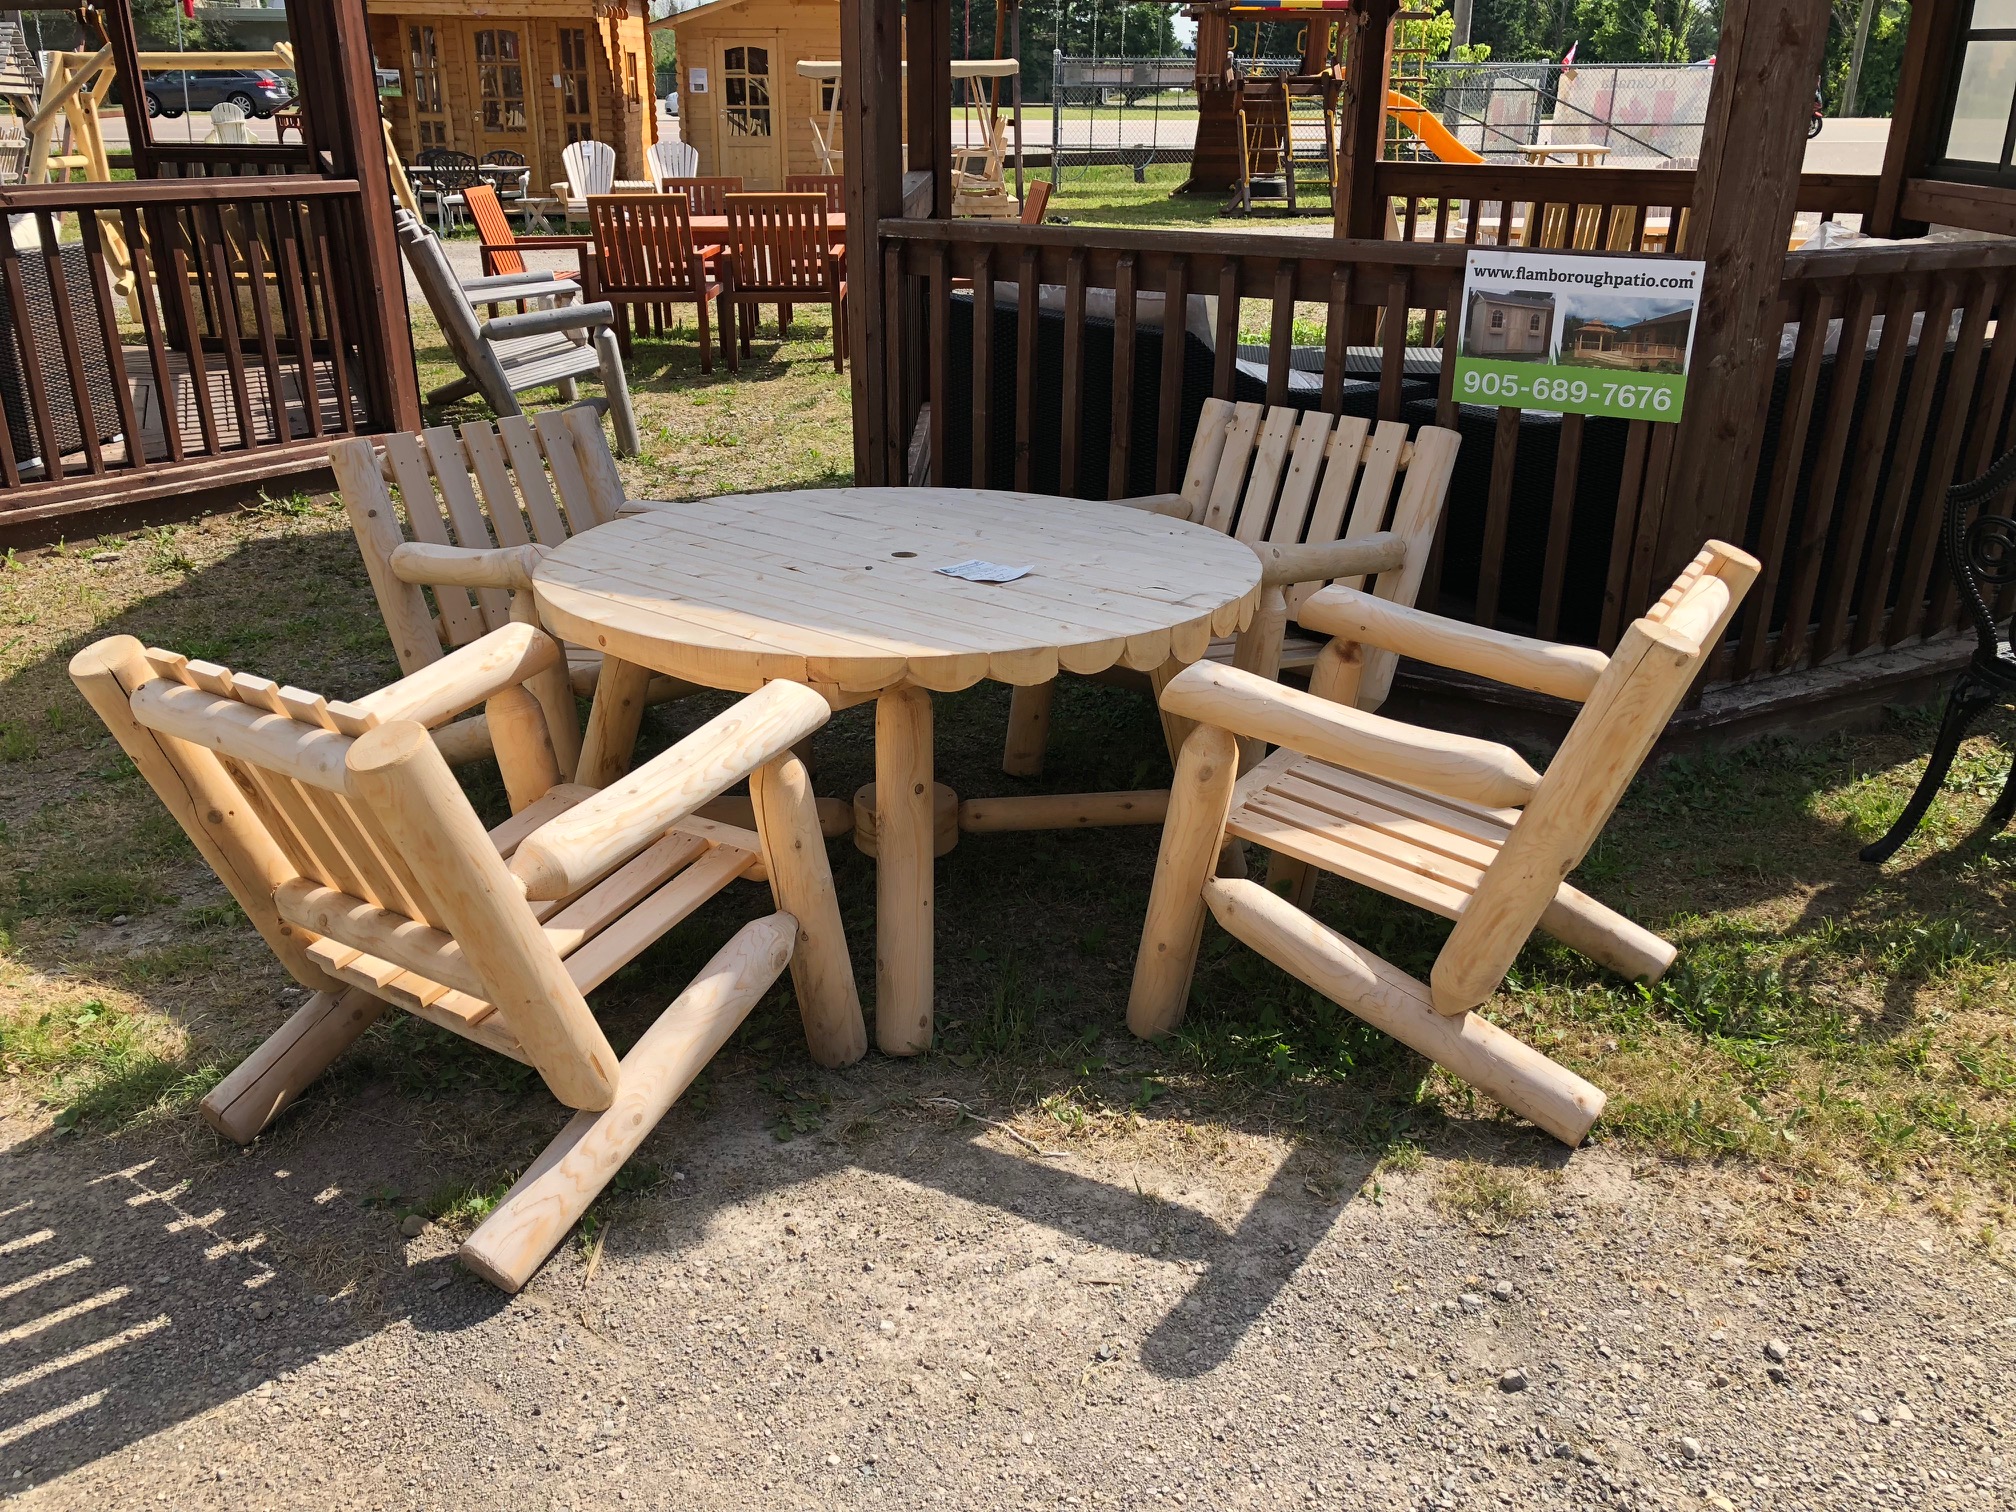 Log Relaxed High back Chairs & Table $1425